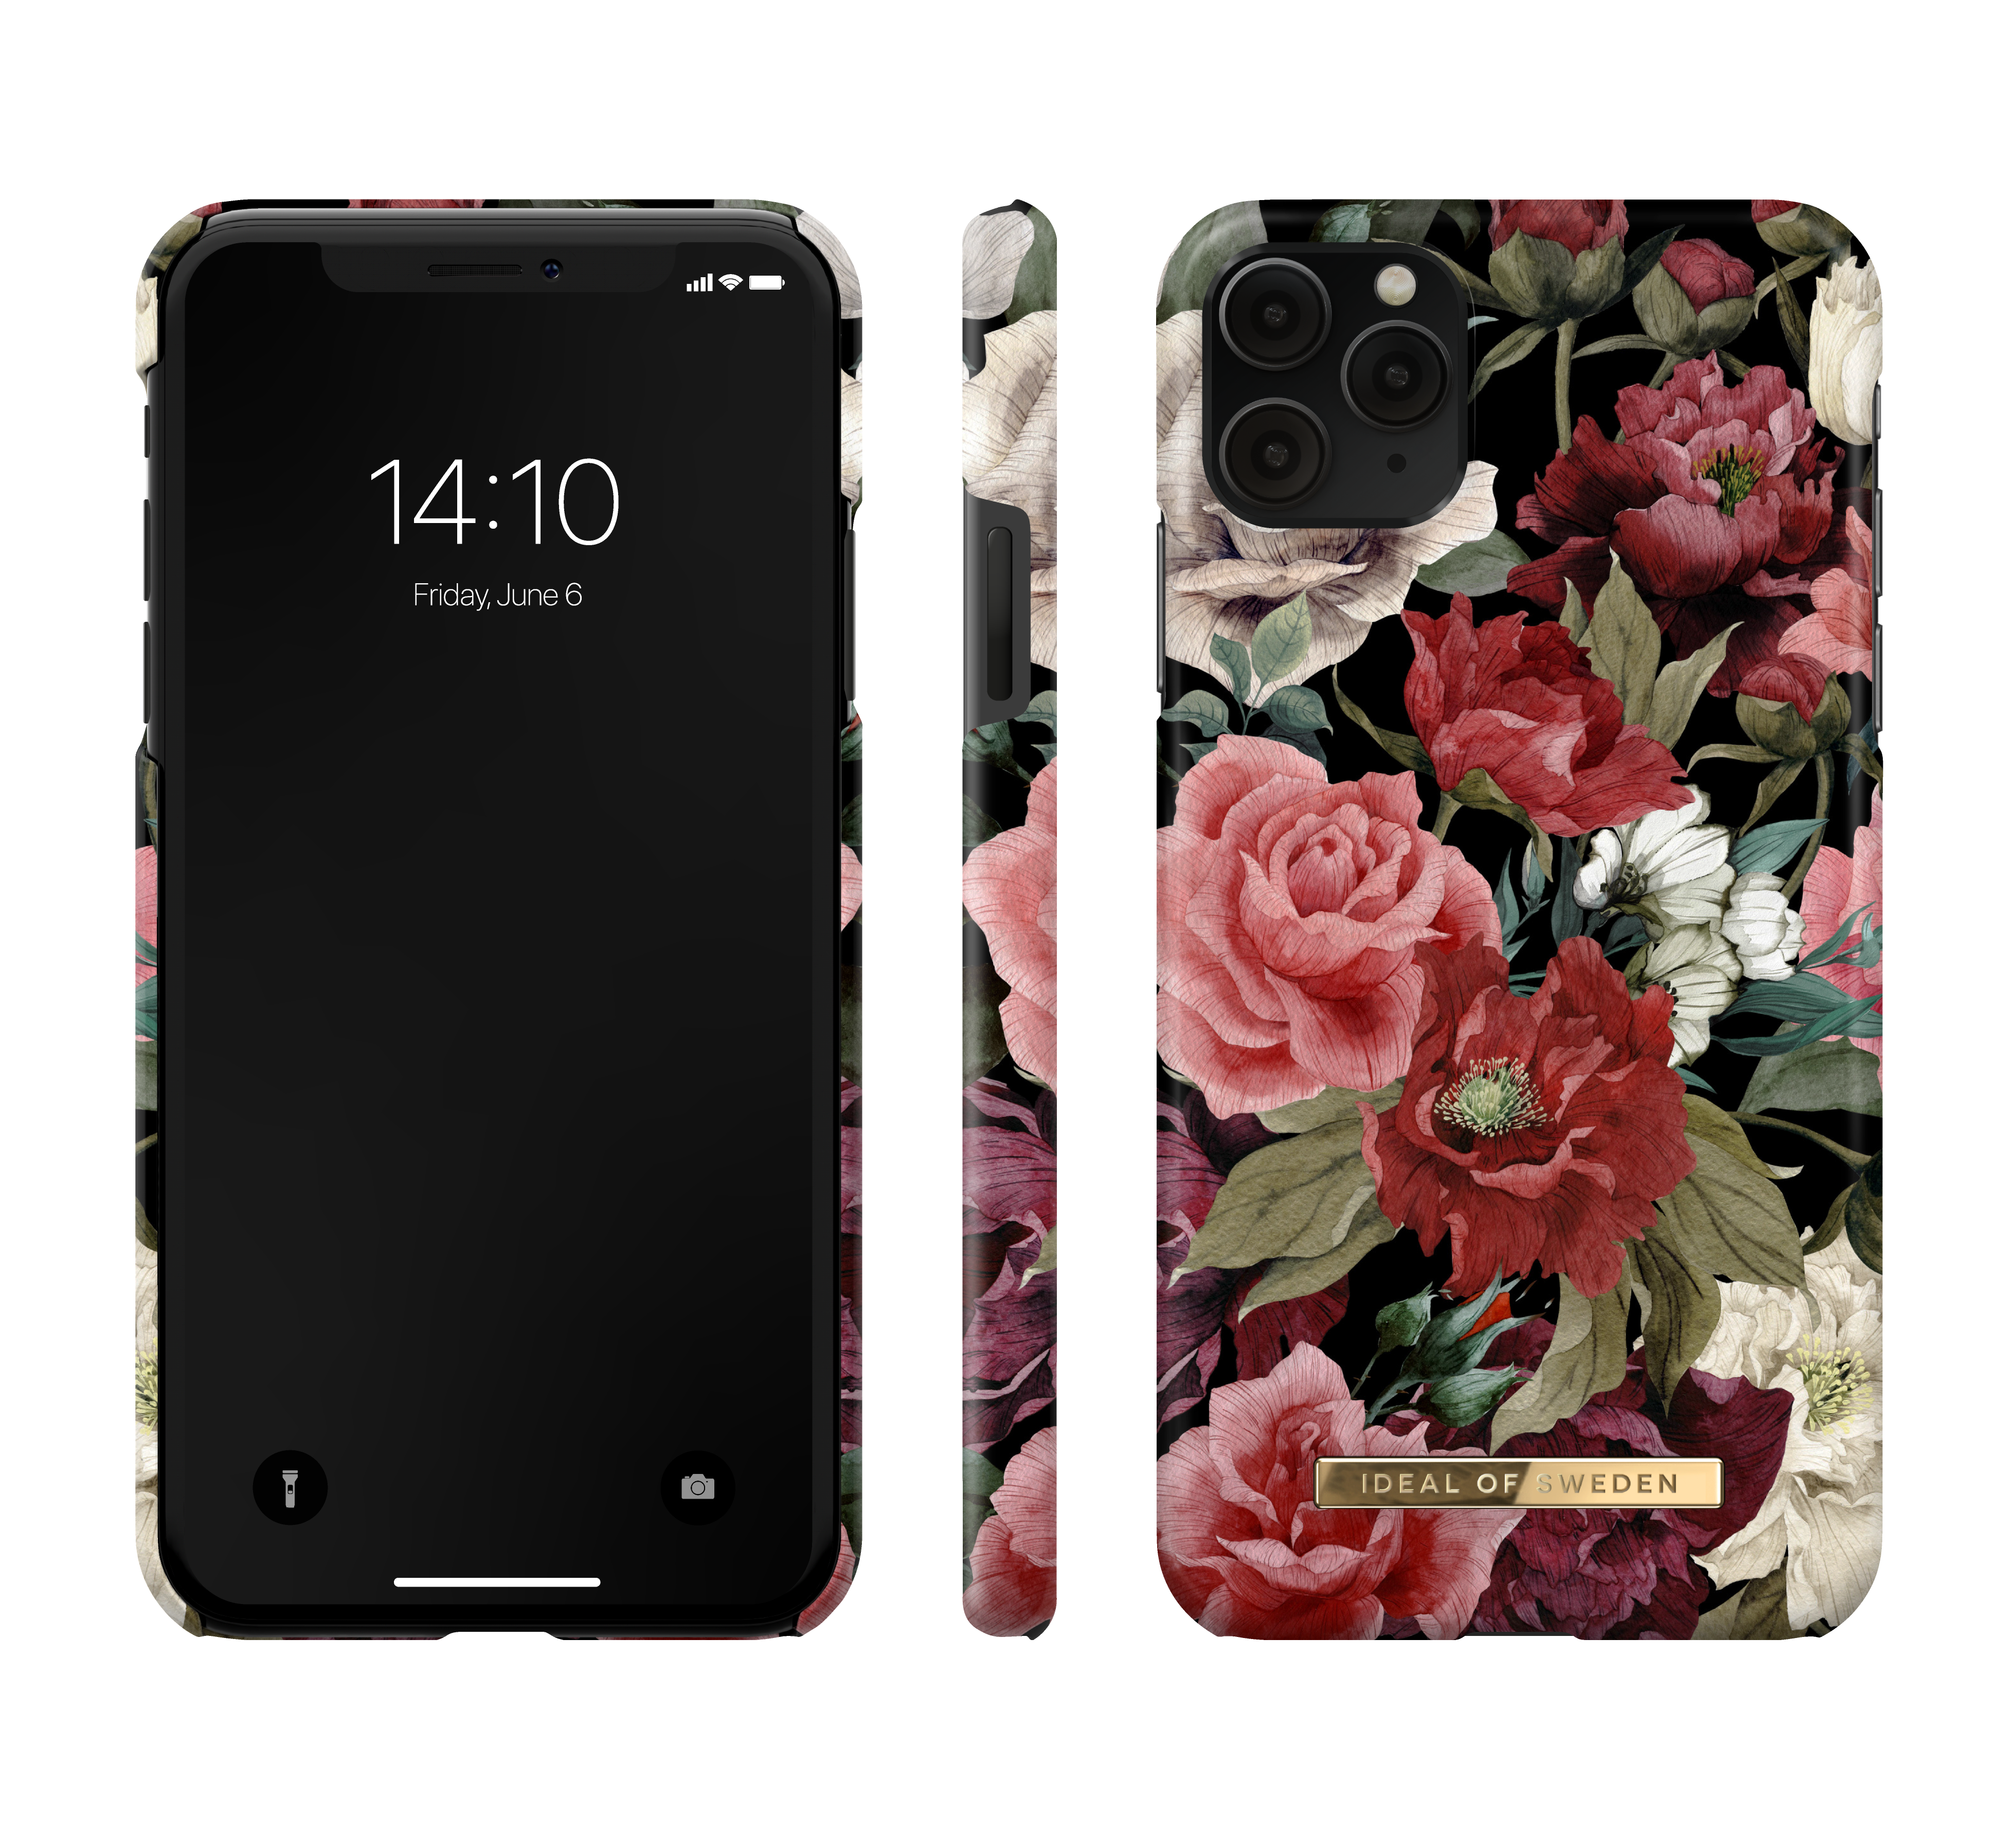 OF XS Max, IDEAL 11 IDFCS17-I1965-63, Pro iPhone iPhone Apple, SWEDEN Antique Max, Roses Backcover,